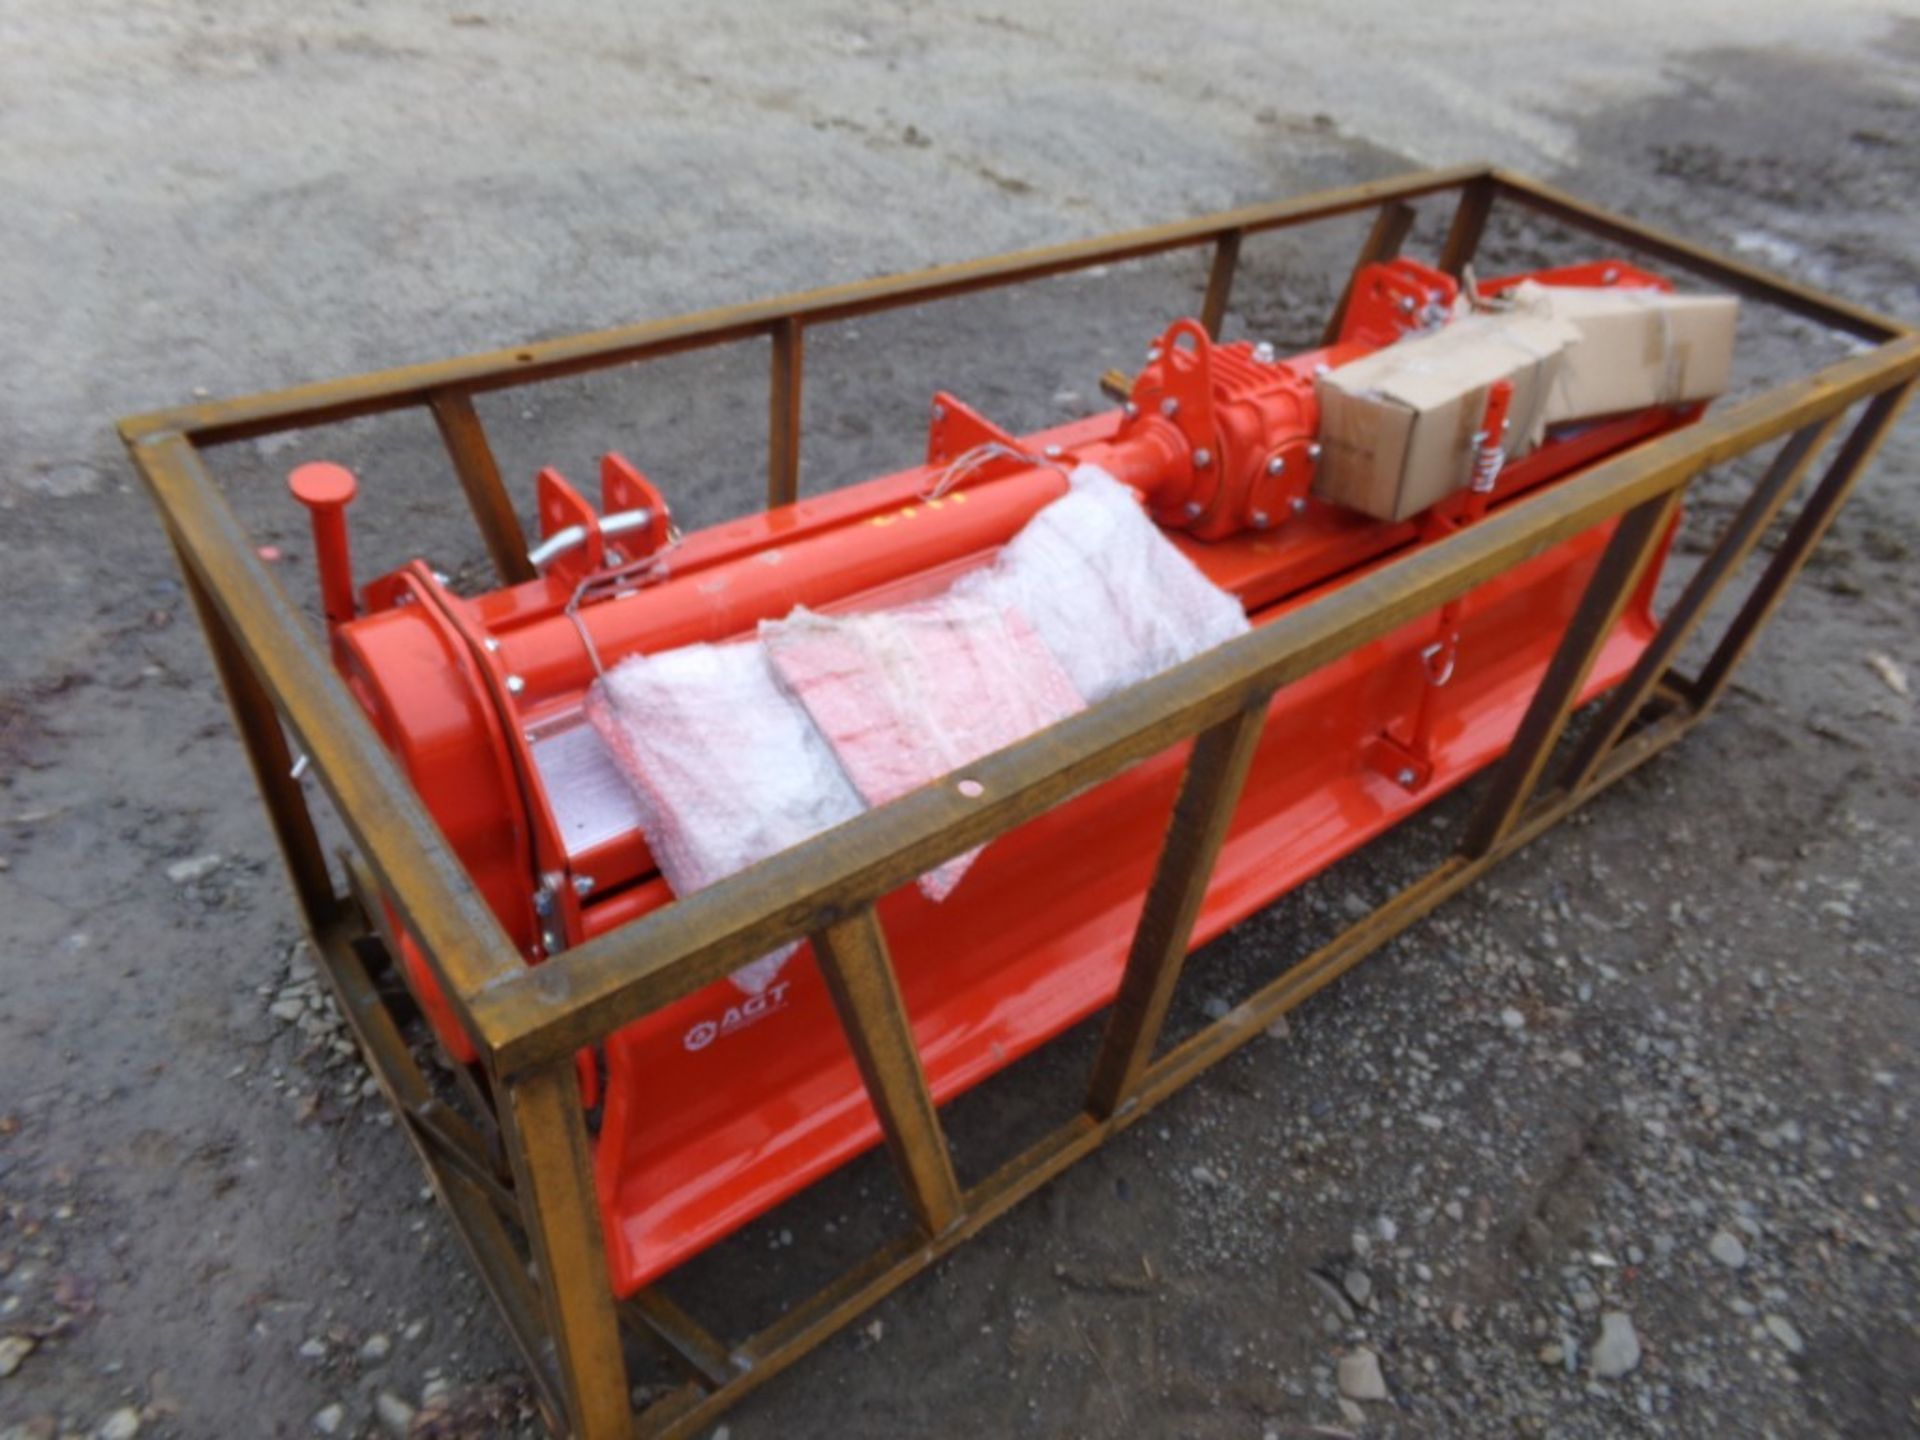 New, Mower King, 72'' Rototiller For 3 PYT Hitch, PTO Driven, Orange, Serial #: 91301A - Image 2 of 2